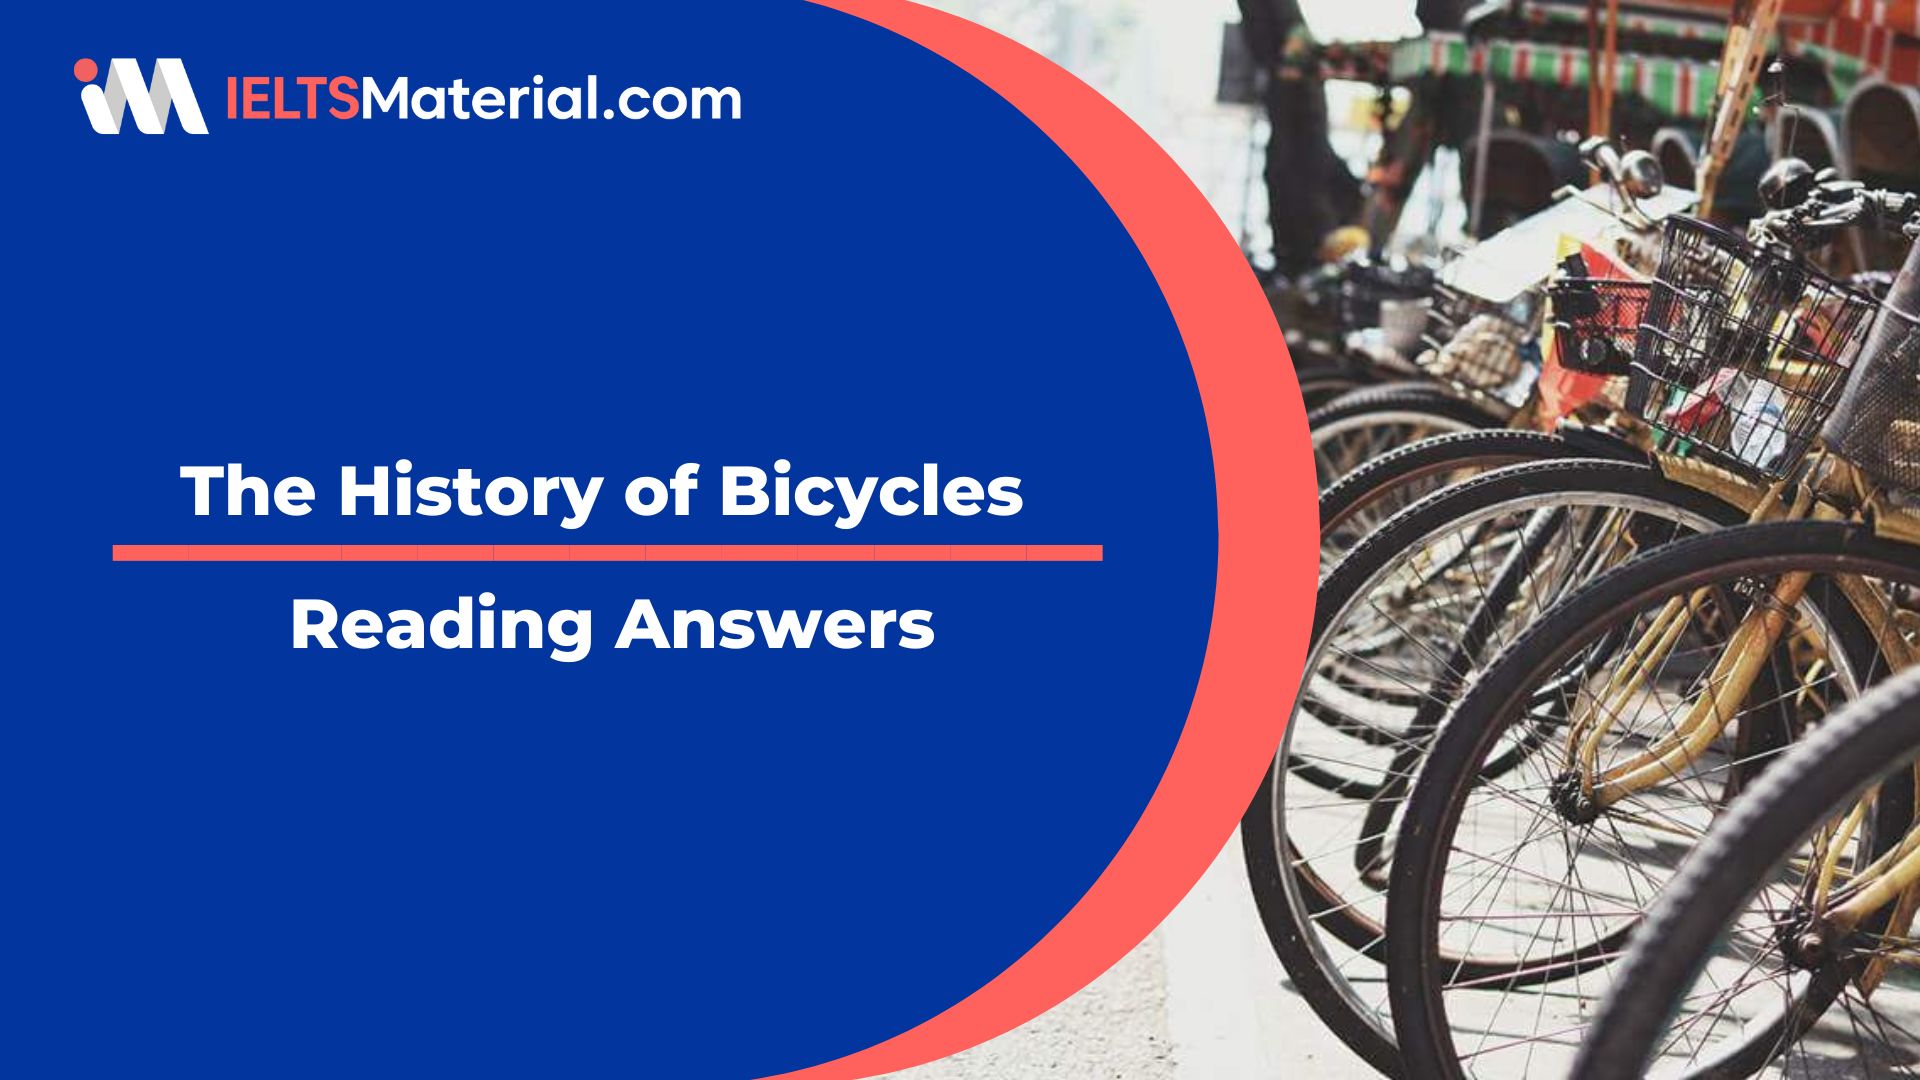 The History of Bicycles Reading Answers